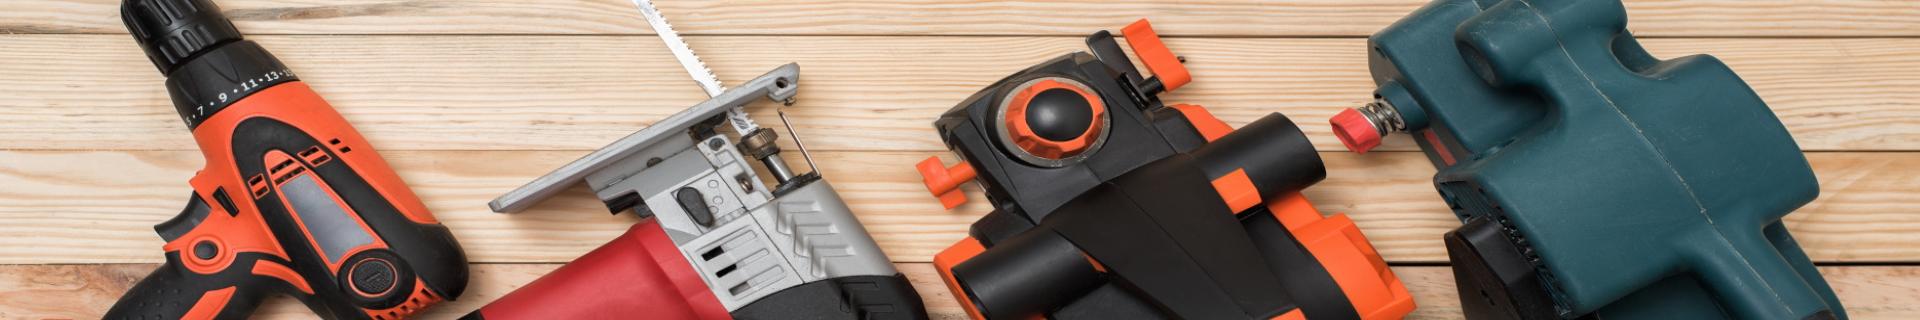 Hand and Power Tool Safety in Construction Environments